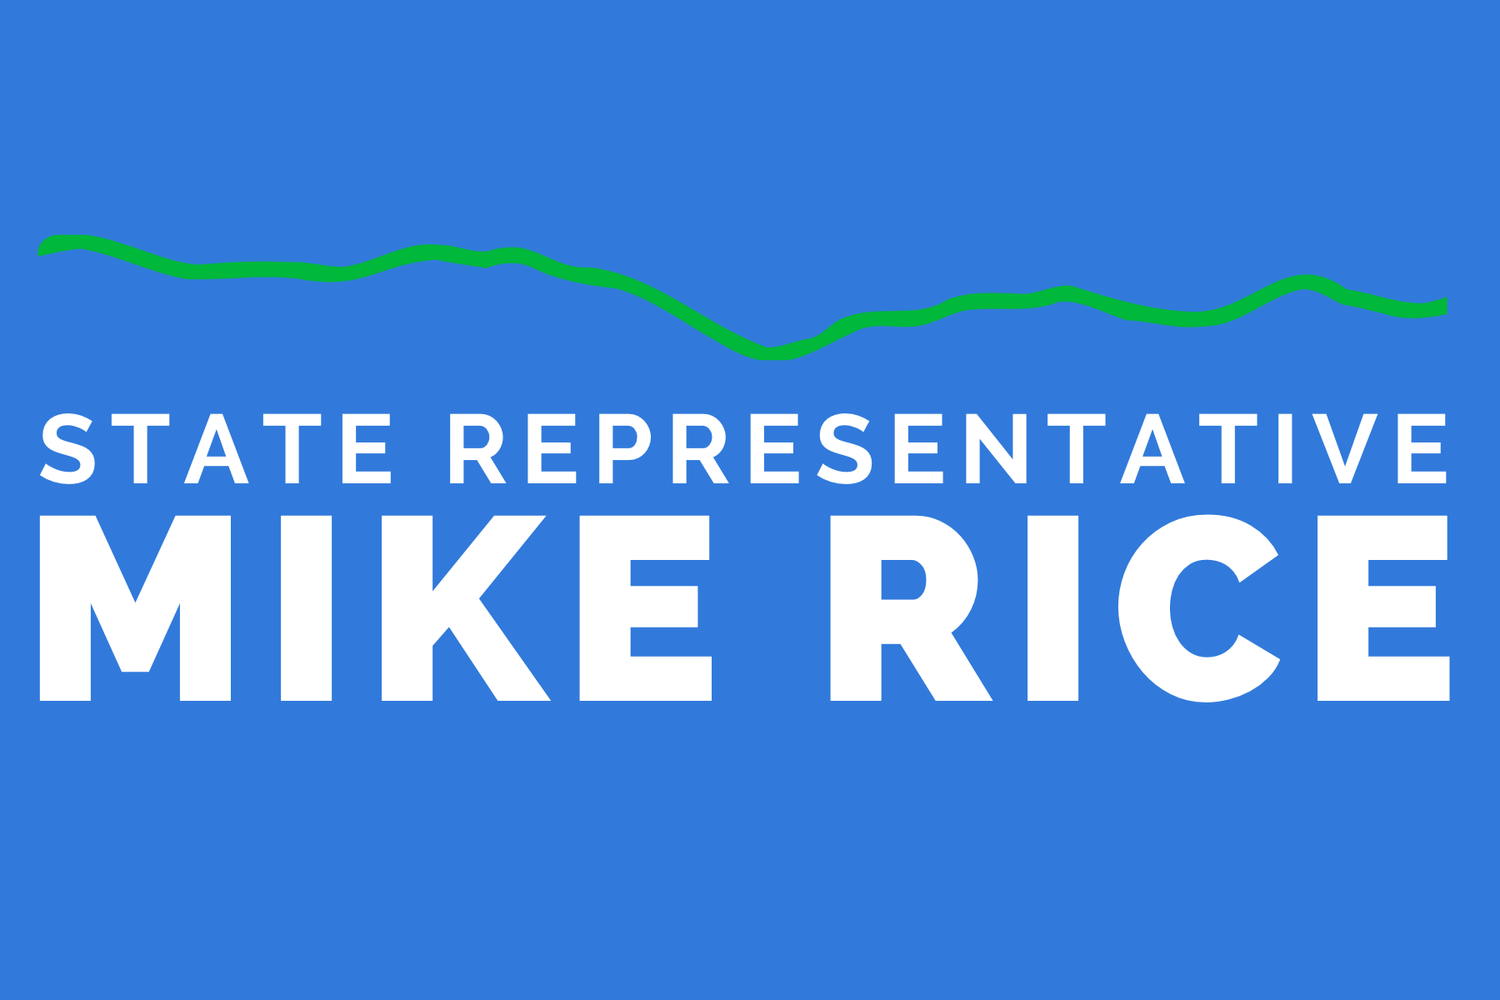 Mike Rice for State Representative